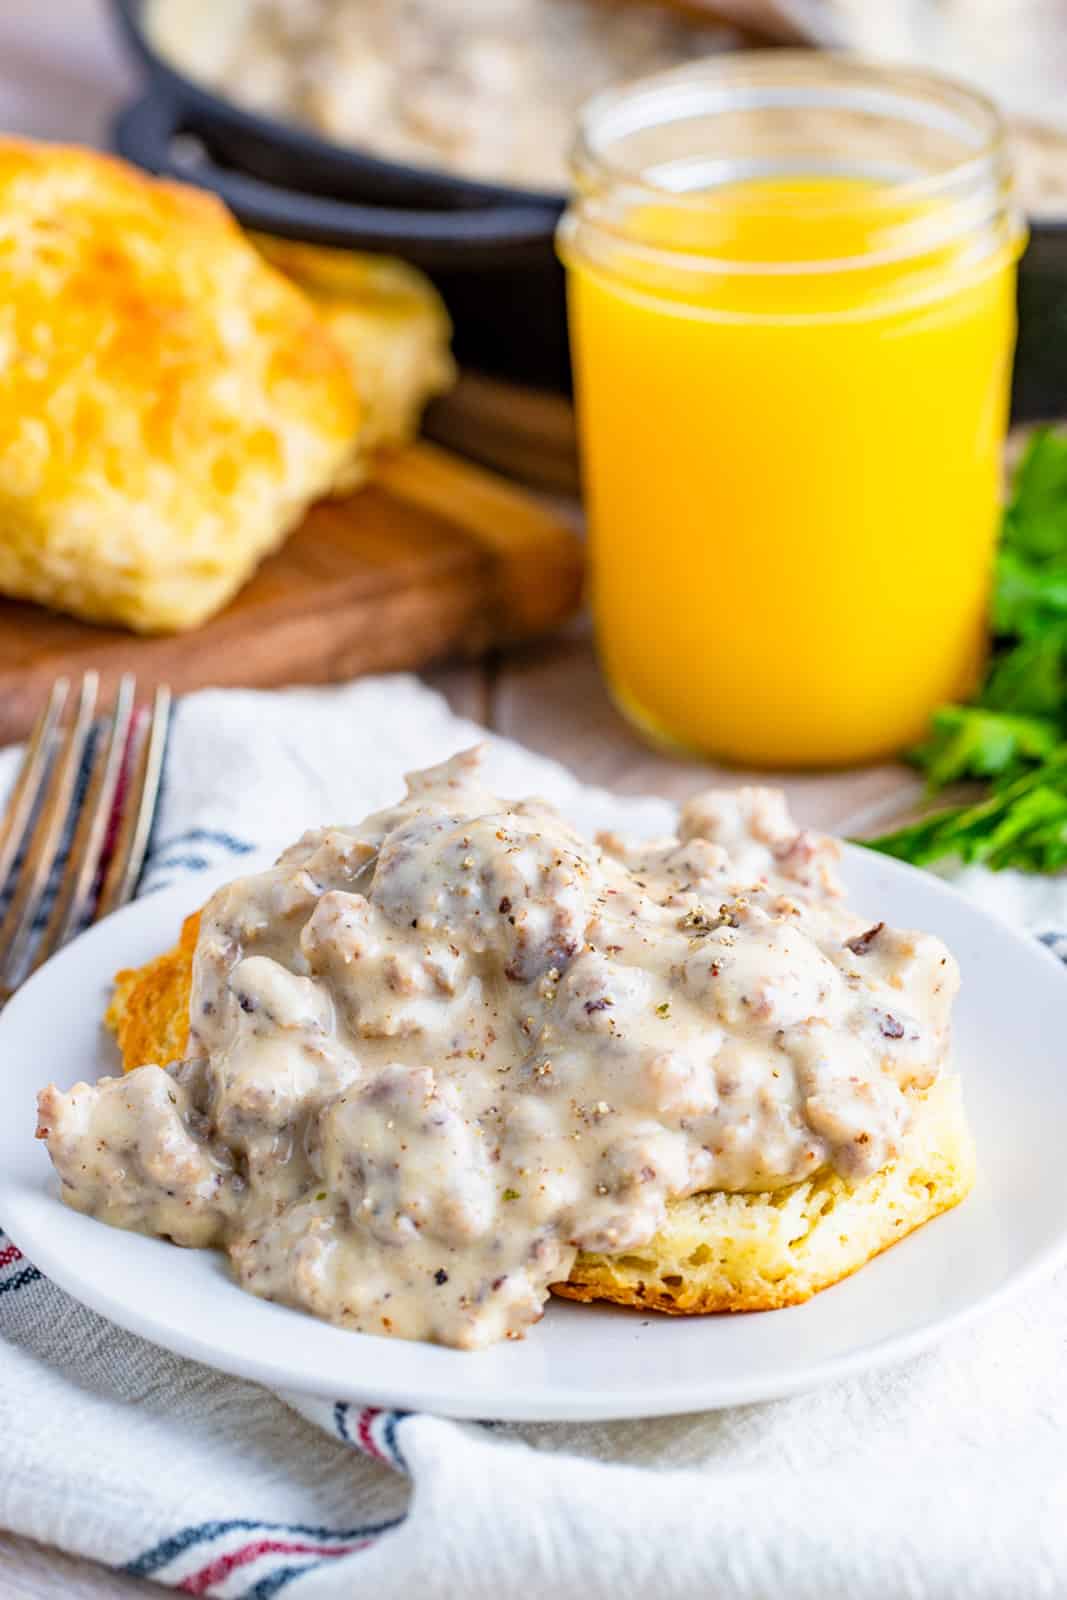 Plate of Biscuits and Gravy with orange juice in back